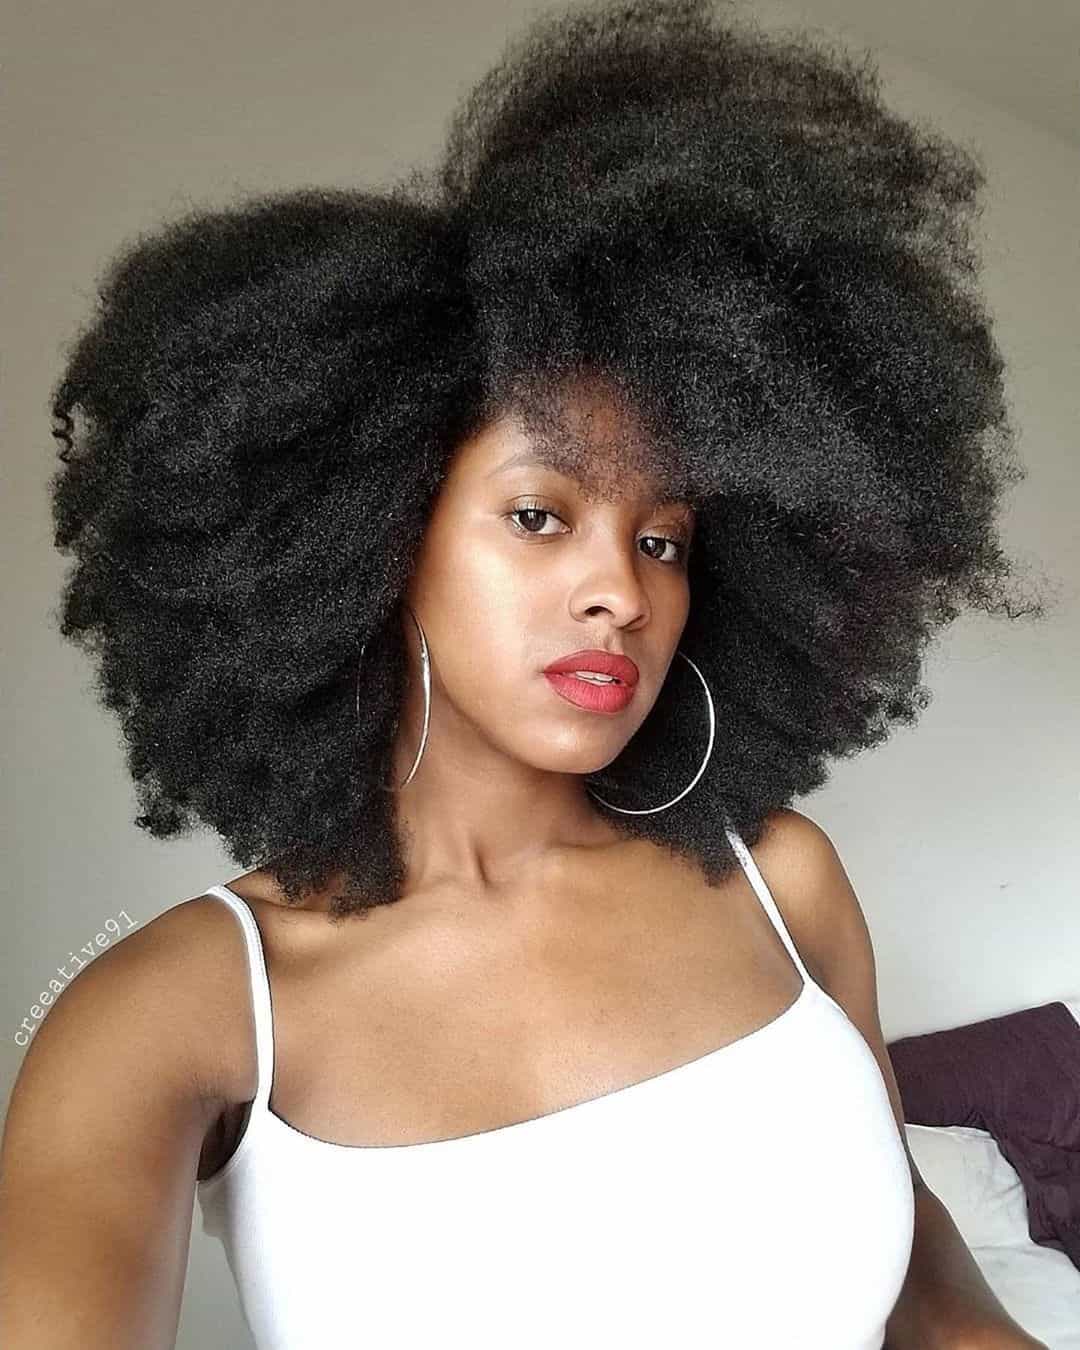 Afro style for natural hair